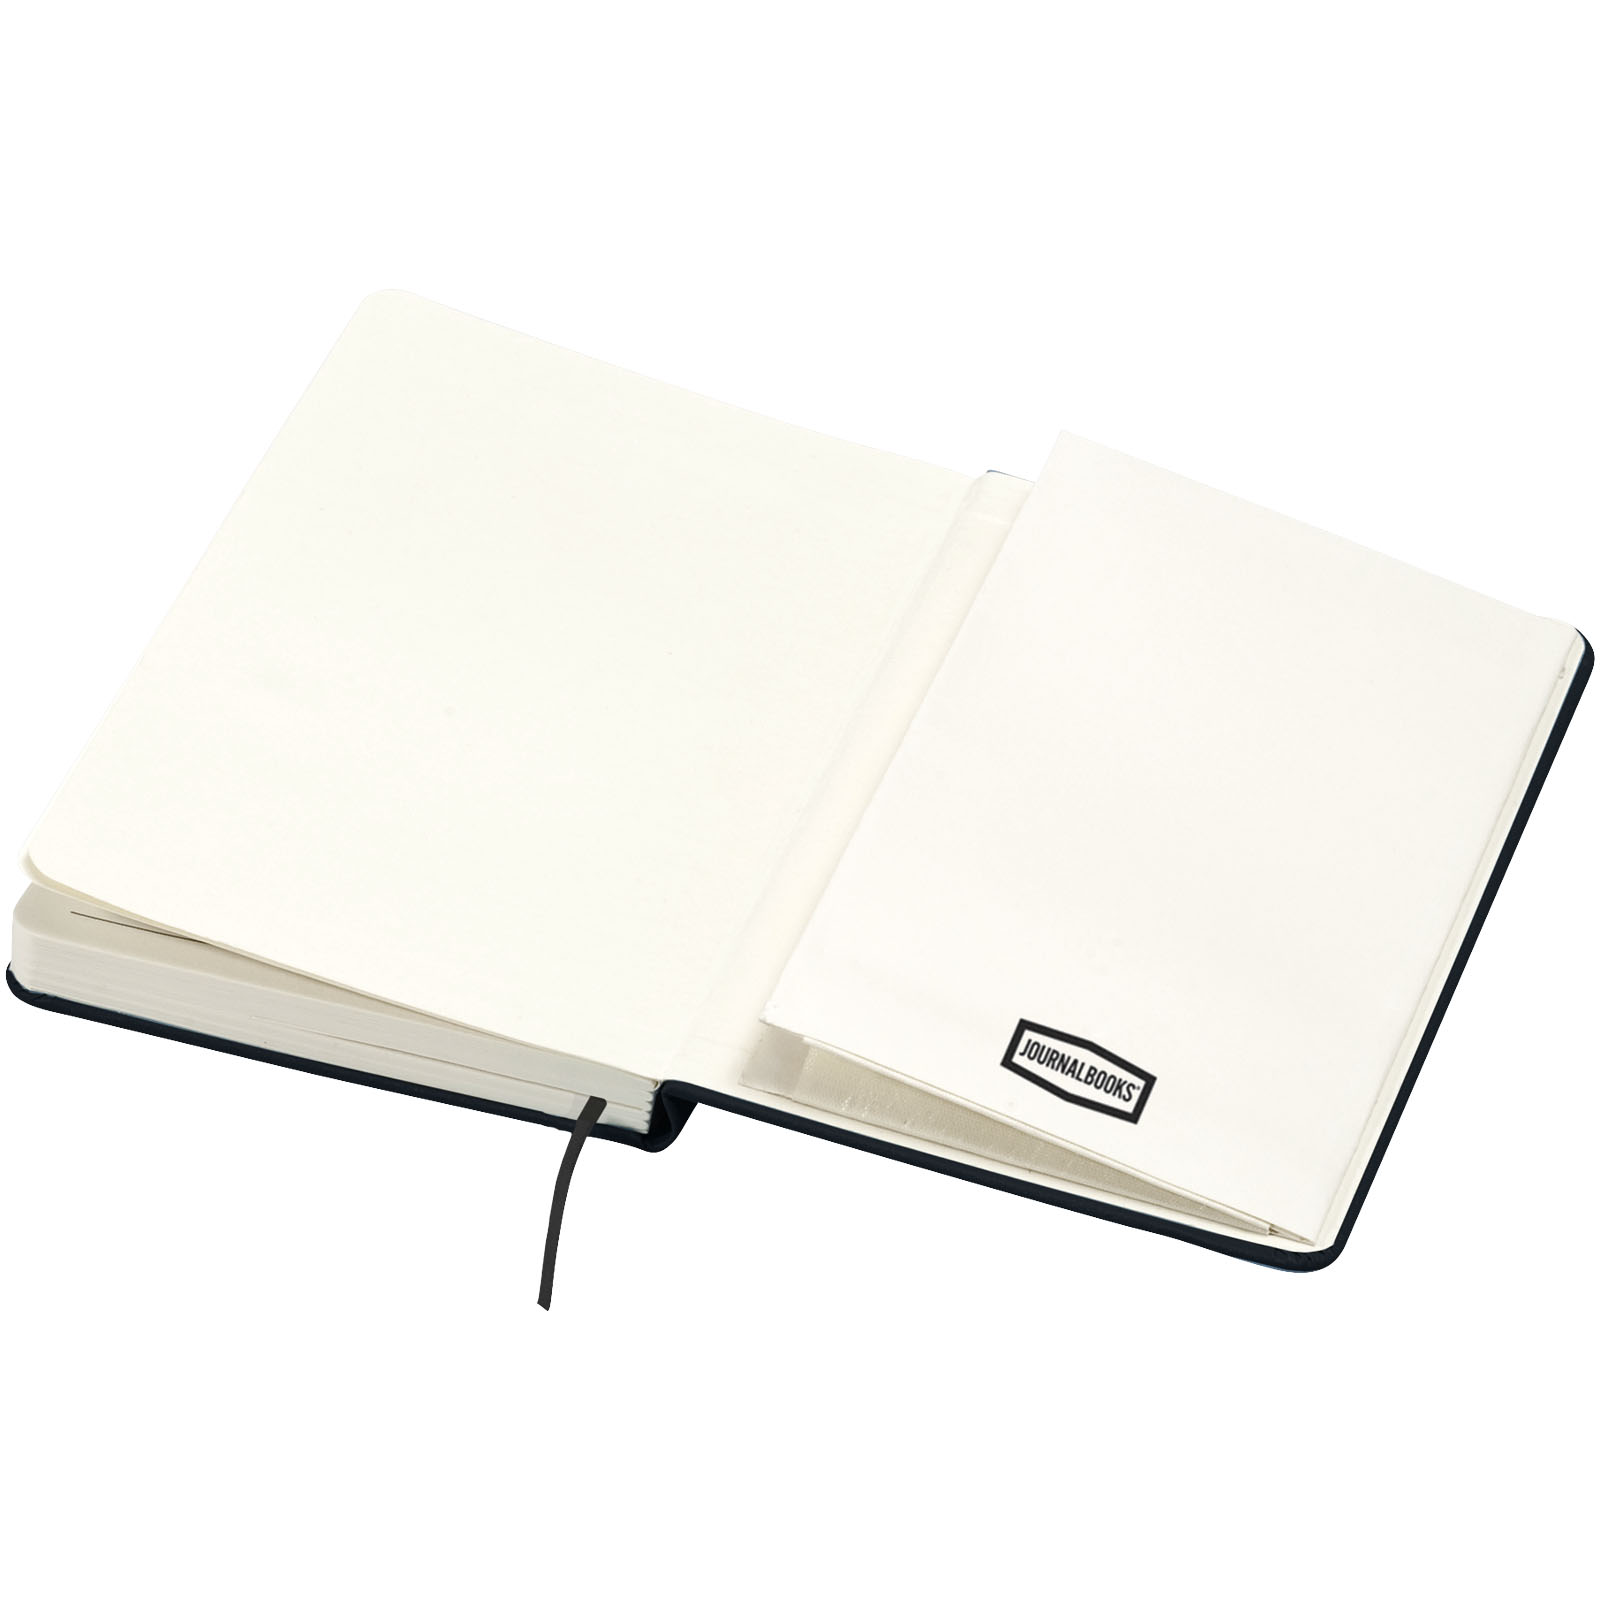 Advertising Hard cover notebooks - Executive A4 hard cover notebook - 6